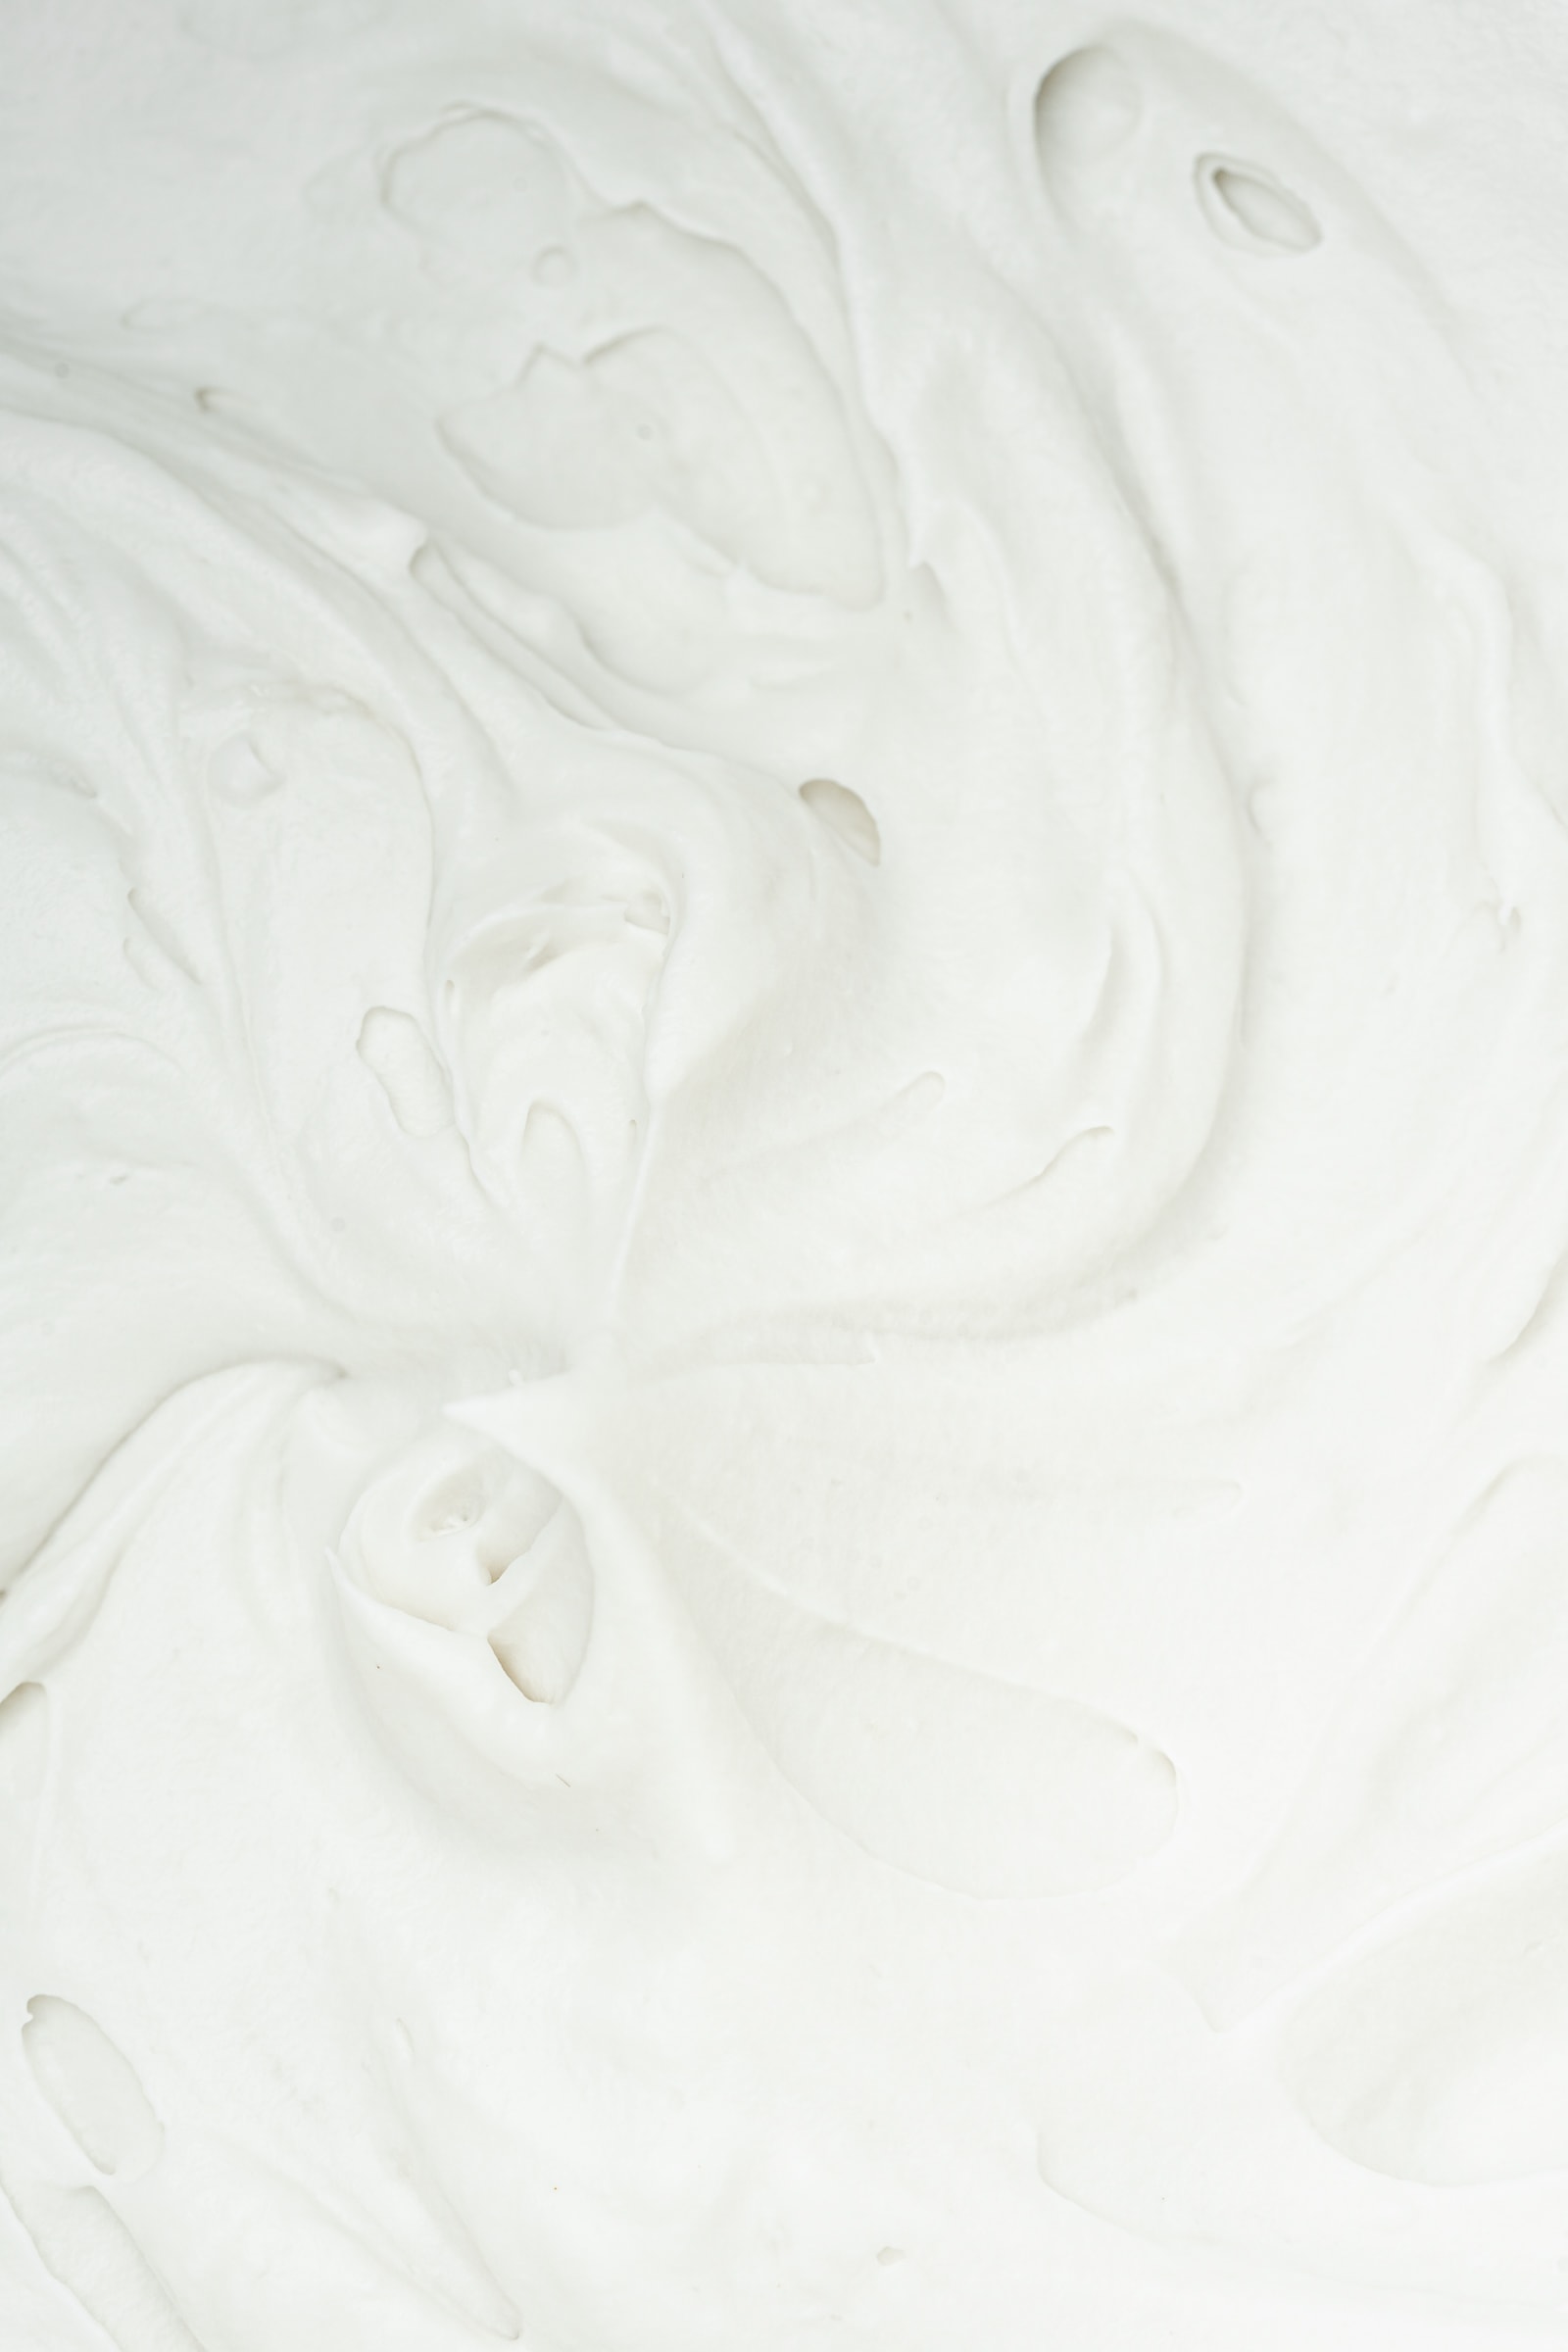 Close up shot of a swirled coconut whipped cream.